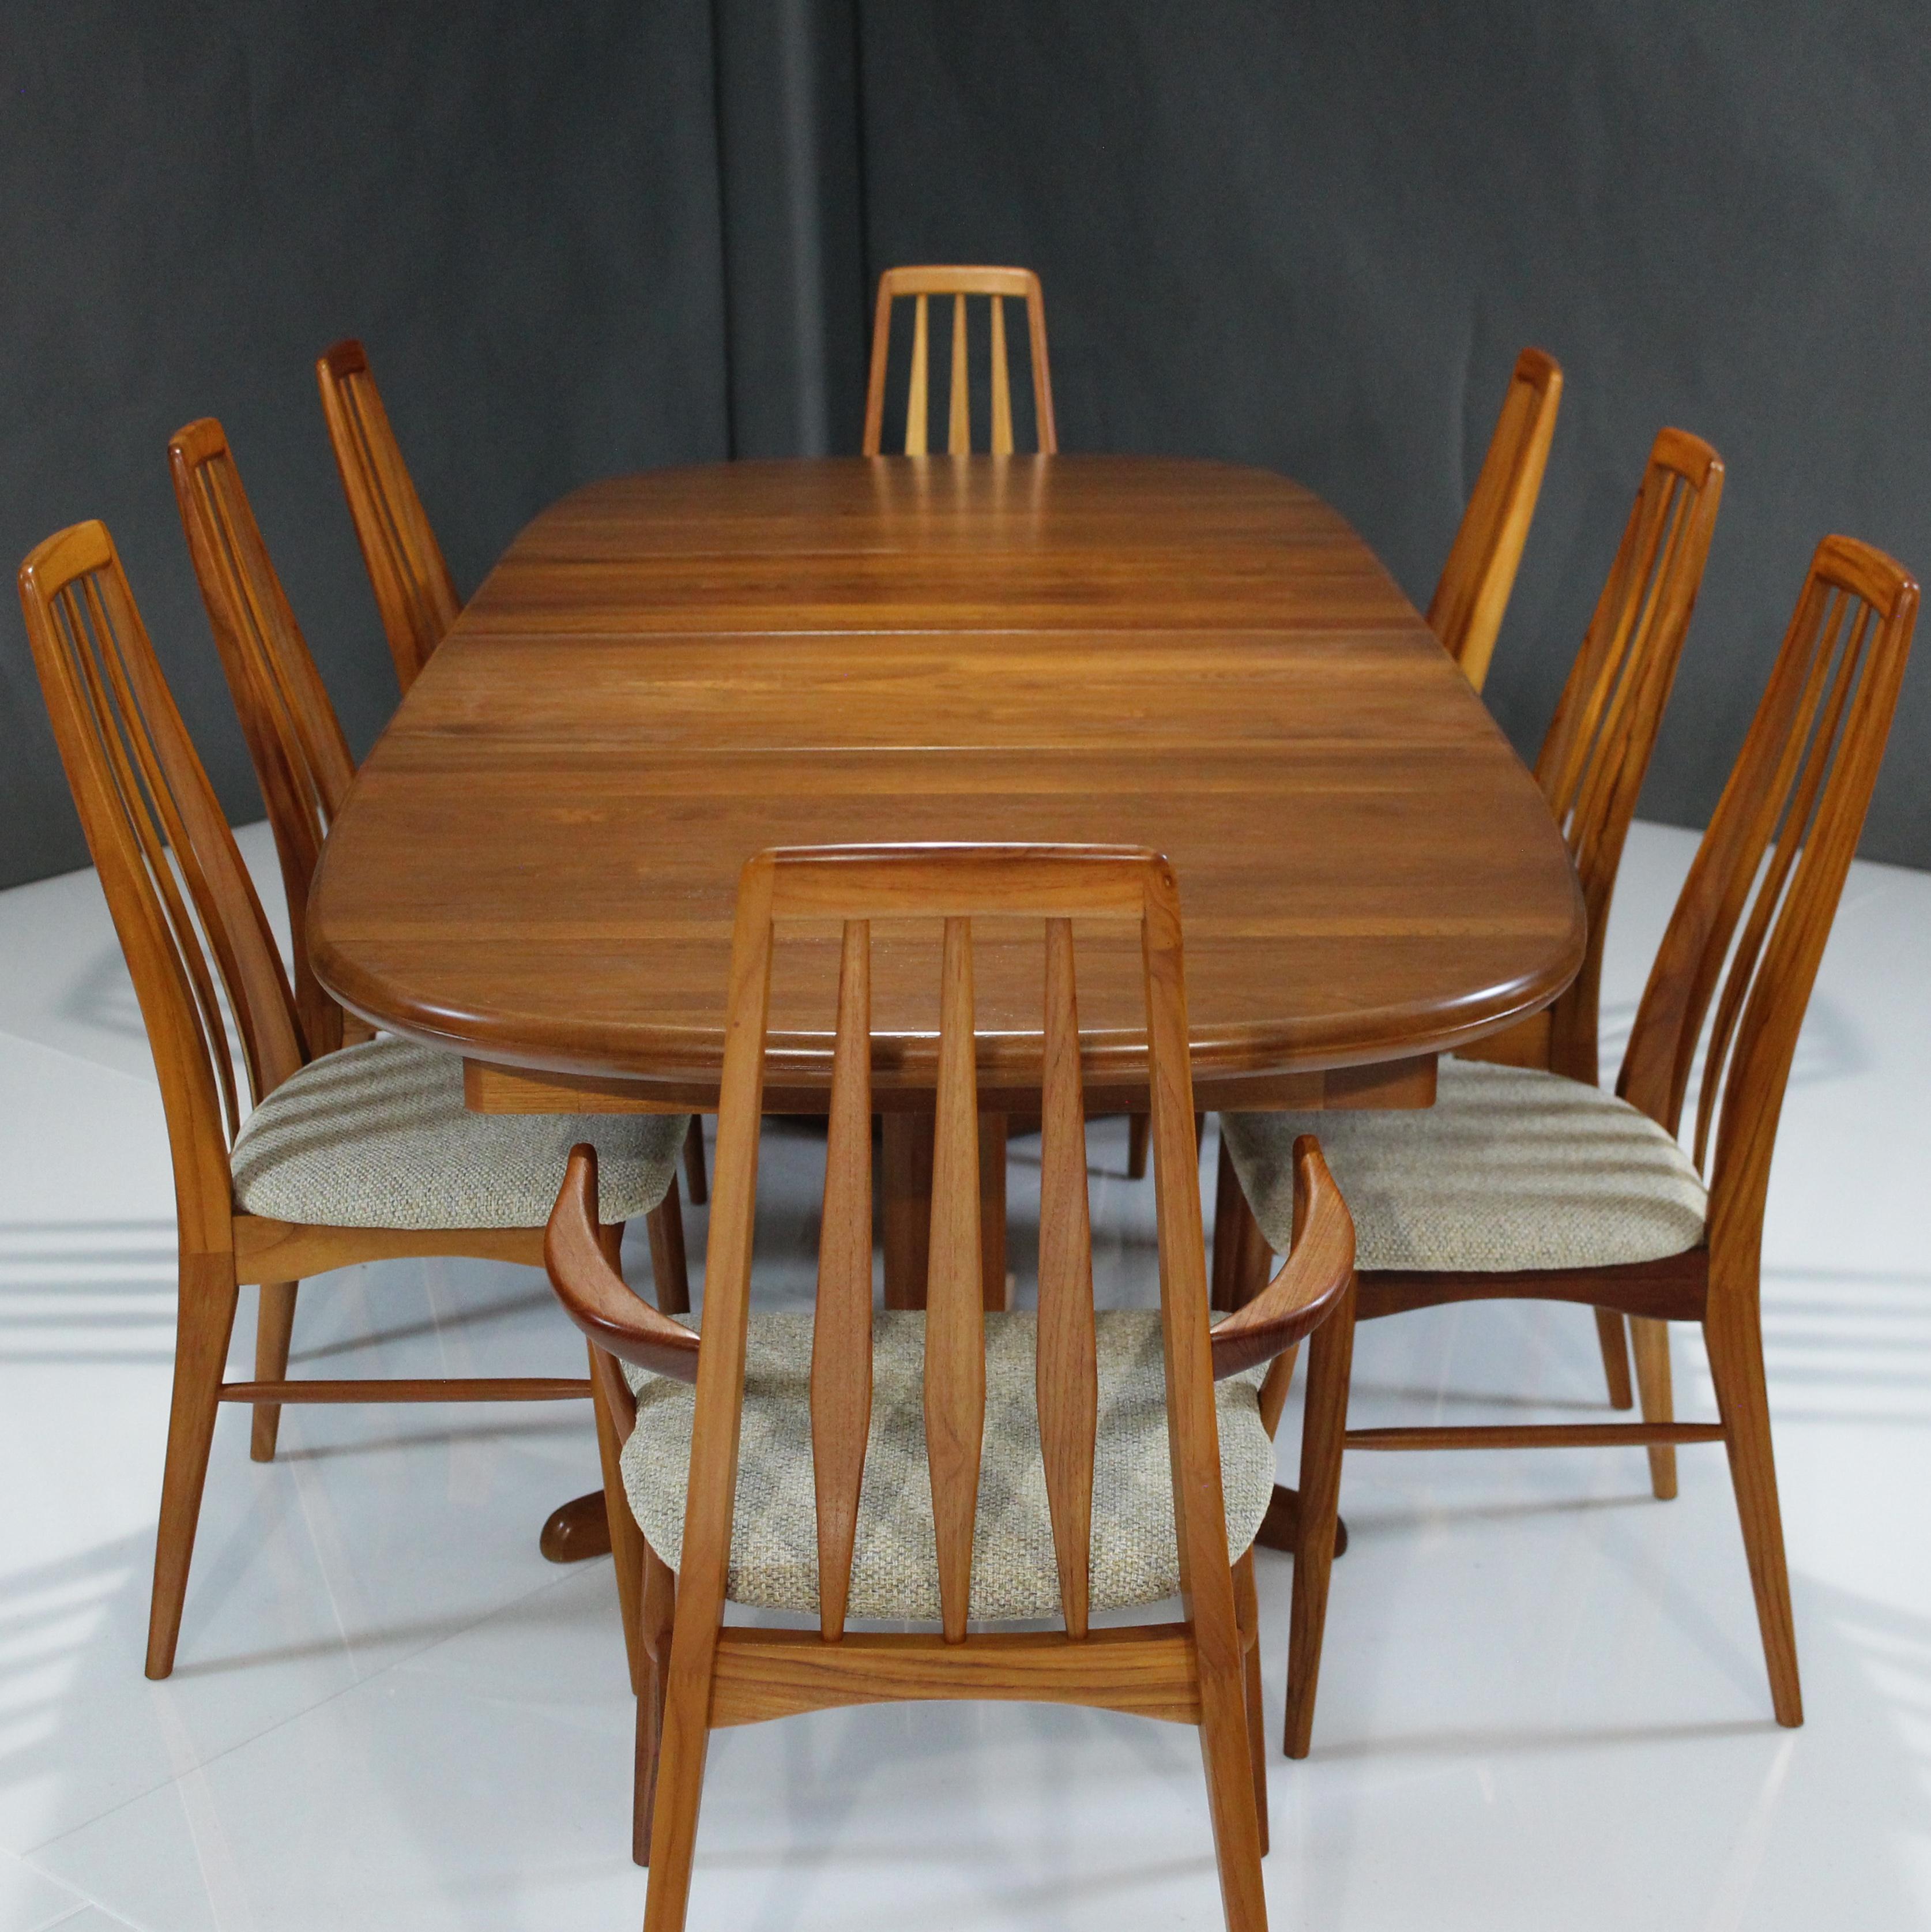 Presenting this absolutely stunning Danish Teak Dining Set with 8 chairs and Extension Table by Niels Koefoed.

About this set:
Starting off with 6 side chairs and 2 armchairs model ‘Eva’ Teak chairs by Niels Koefoed displaying elegant visuals